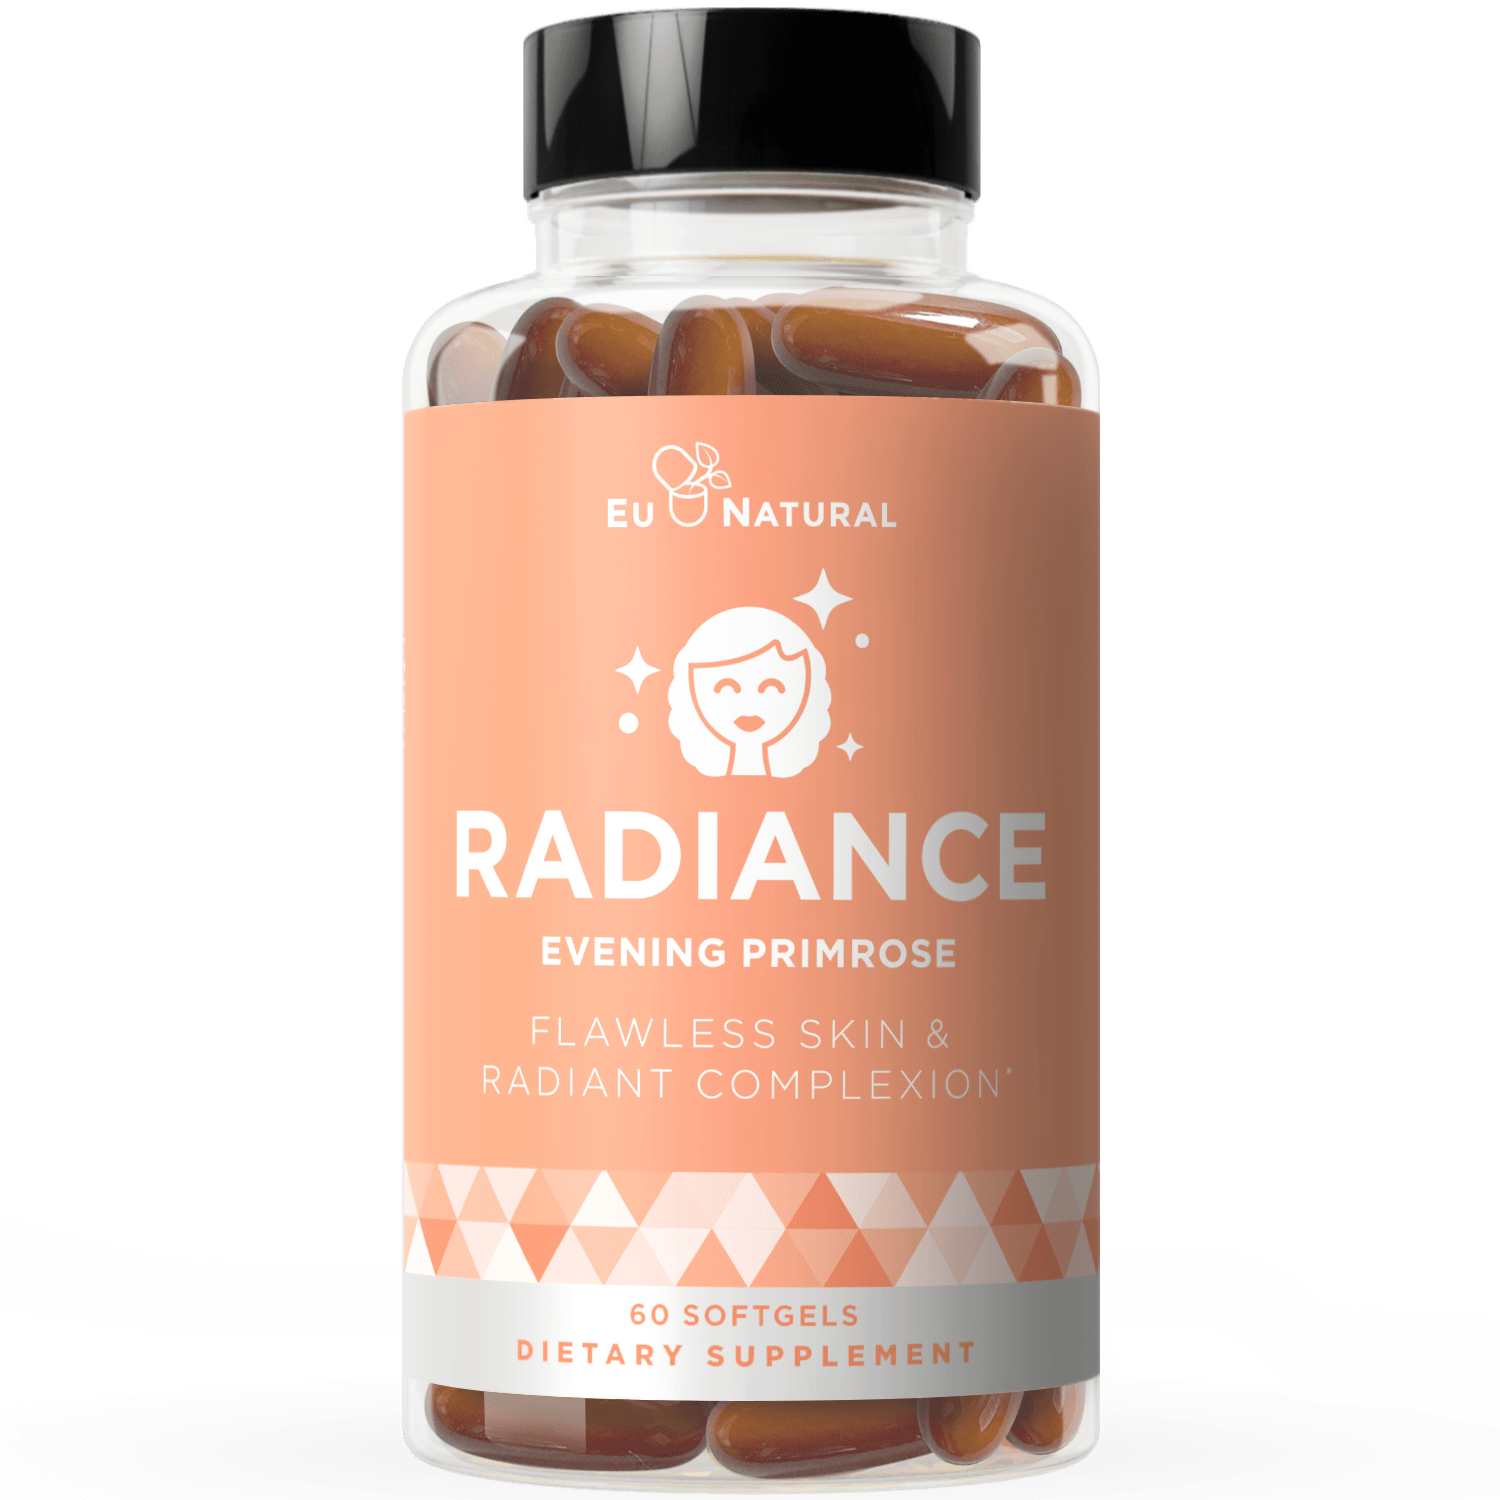 Eu Natural Radiance Flawless Skin & Complexion 50% Off